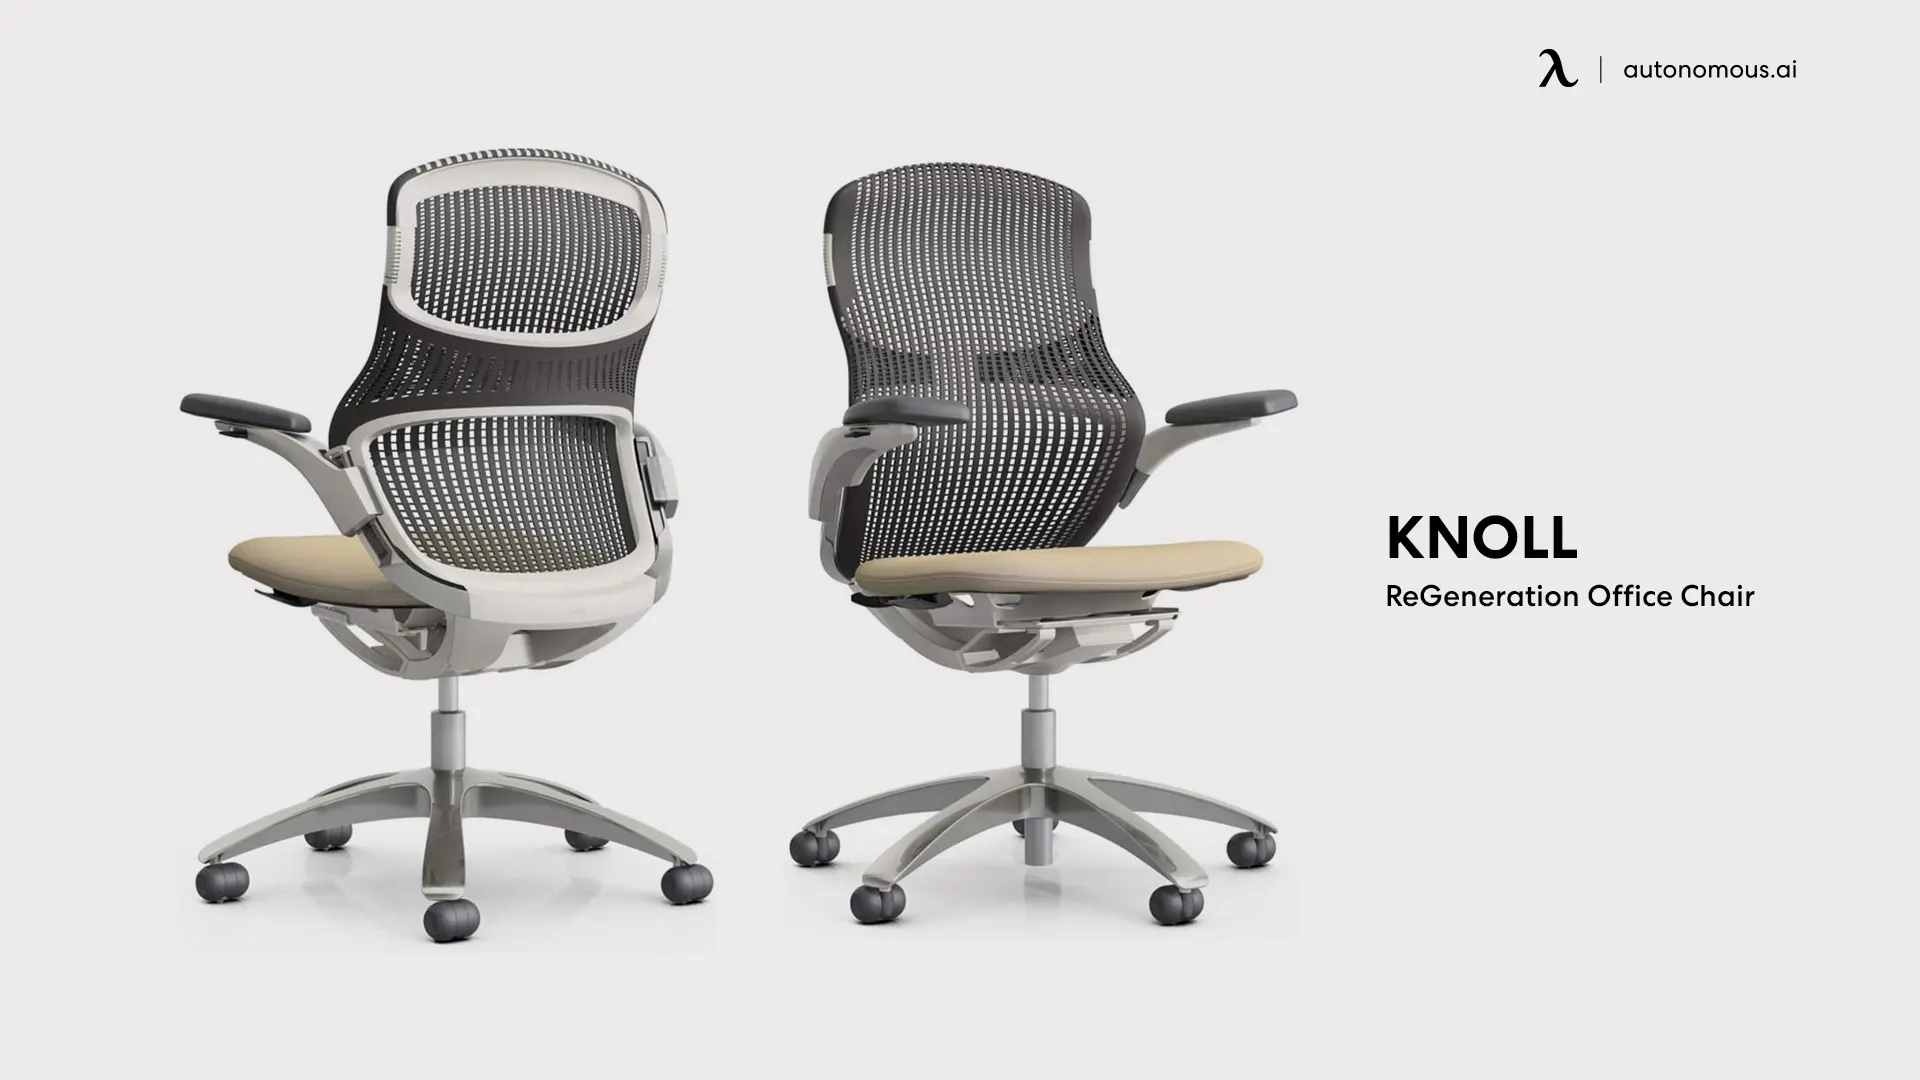 ReGeneration by Knoll - expensive office chair